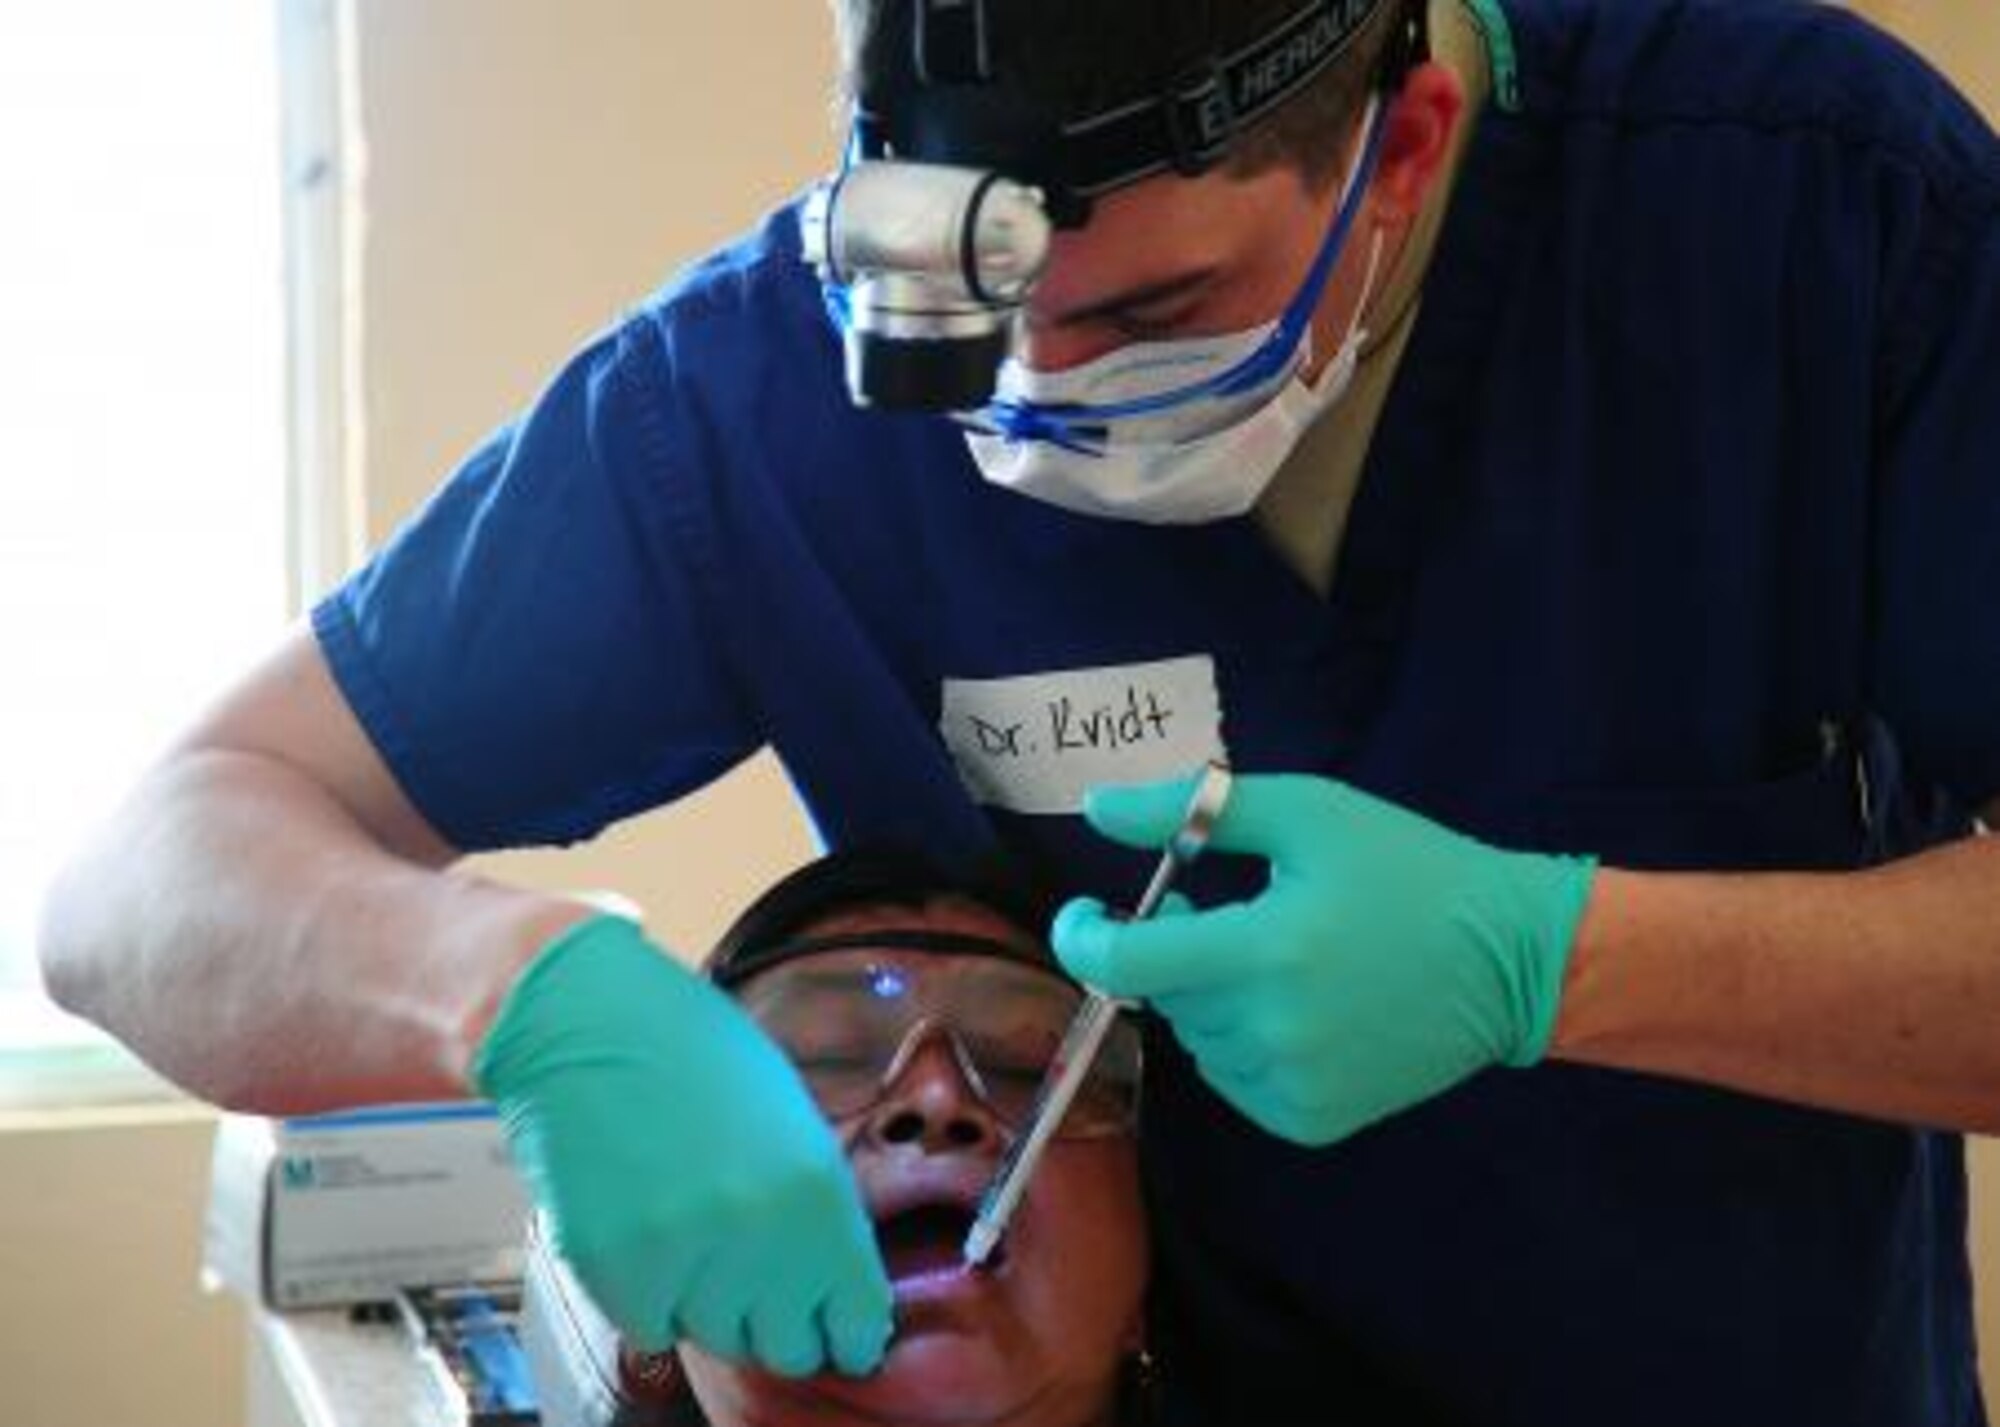 U.S. Air Force Capt. Brandon Kvidt, dental resident from Offutt Air Force Base, Neb., administers anesthesia to a Belizean woman during a dental readiness training exercise at the Punta Gorda Hospital annex in Punta Gorda, Belize, April 26, 2013. Dental professionals from the U.S. and Canada are providing free dental treatment at multiple readiness training exercises throughout Belize as part of an exercise known as New Horizons. The training exercises are designed to provide dental care to people throughout Belize, while helping improve the skills of U.S. and Canadian military medical forces. (U.S. Air Force photo by Tech Sgt. Tony Tolley/Released)
